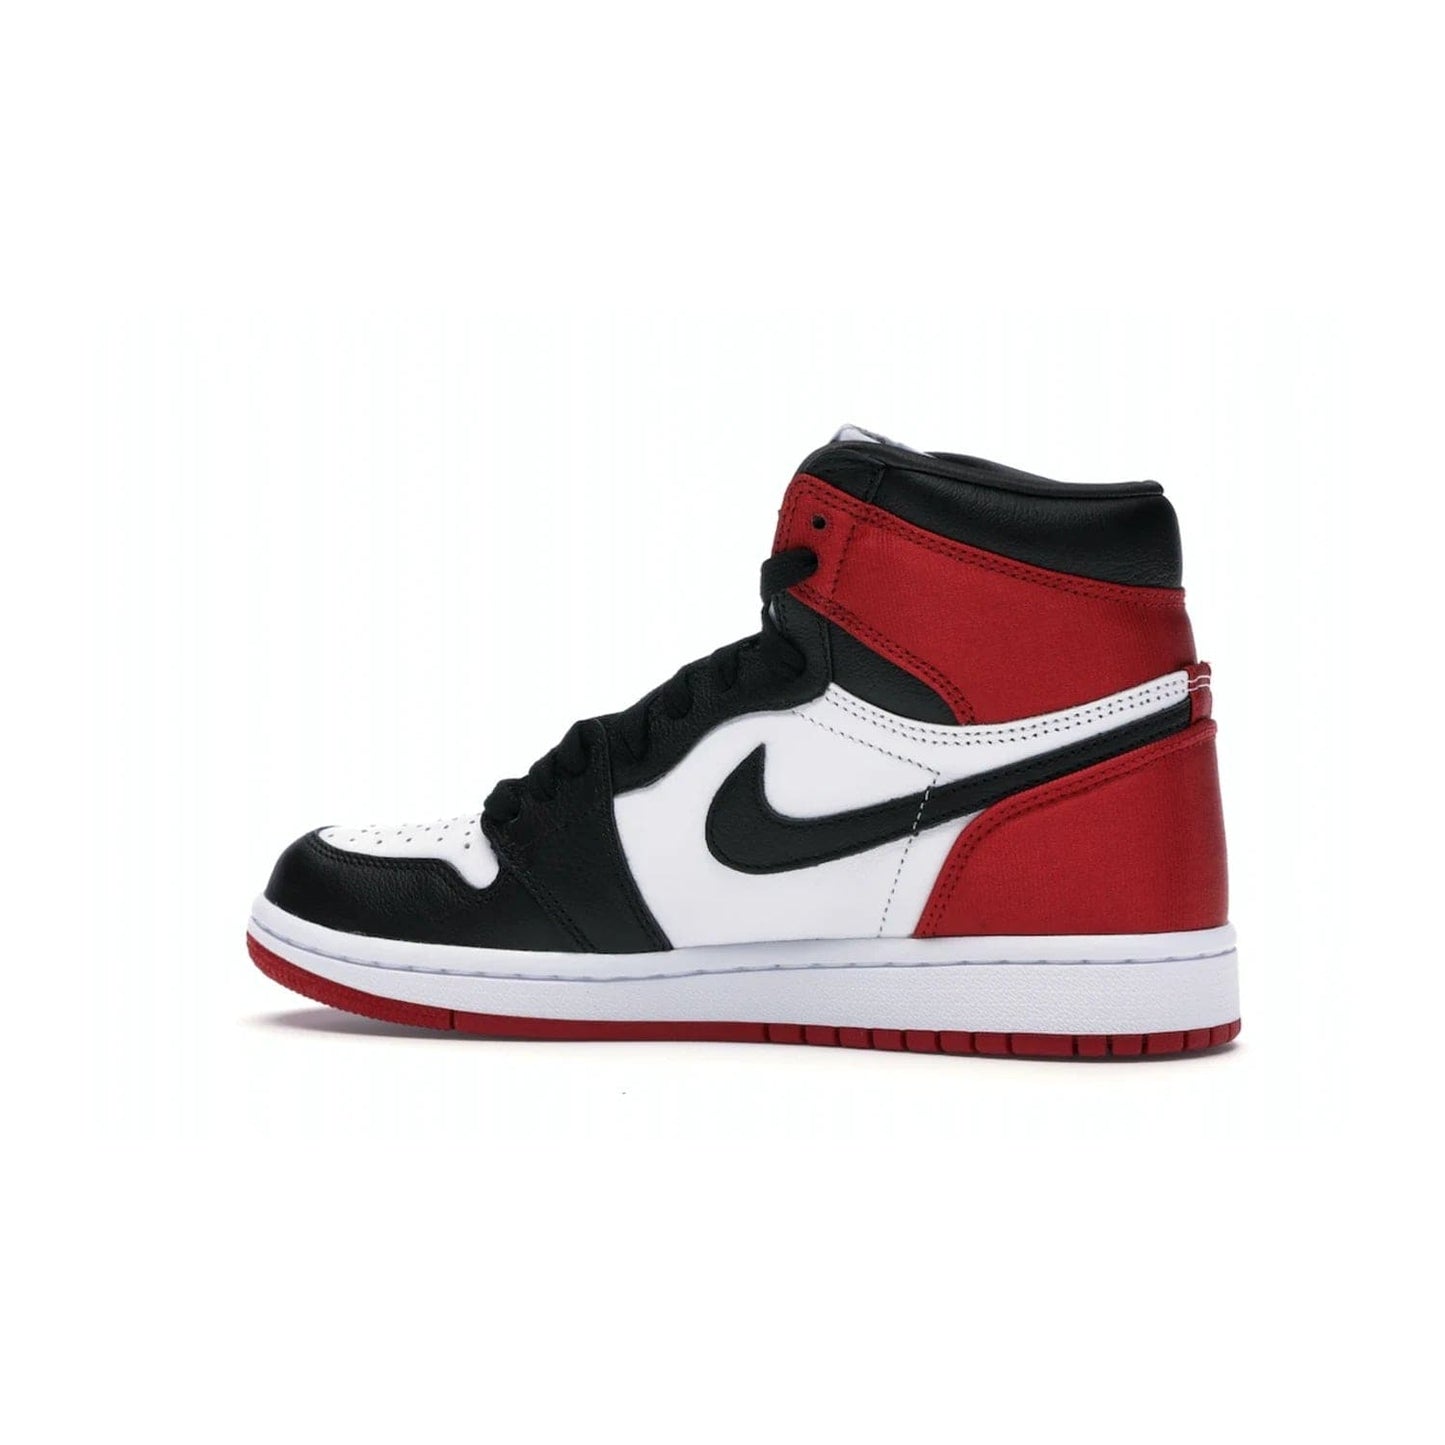 Jordan 1 Retro High Satin Black Toe (Women's) - Image 21 - Only at www.BallersClubKickz.com - Luxurious take on the timeless Air Jordan 1. Features a mix of black leather and satin materials with subtle University Red accents. Elevated look with metal Wings logo on the heel. Released in August 2019.